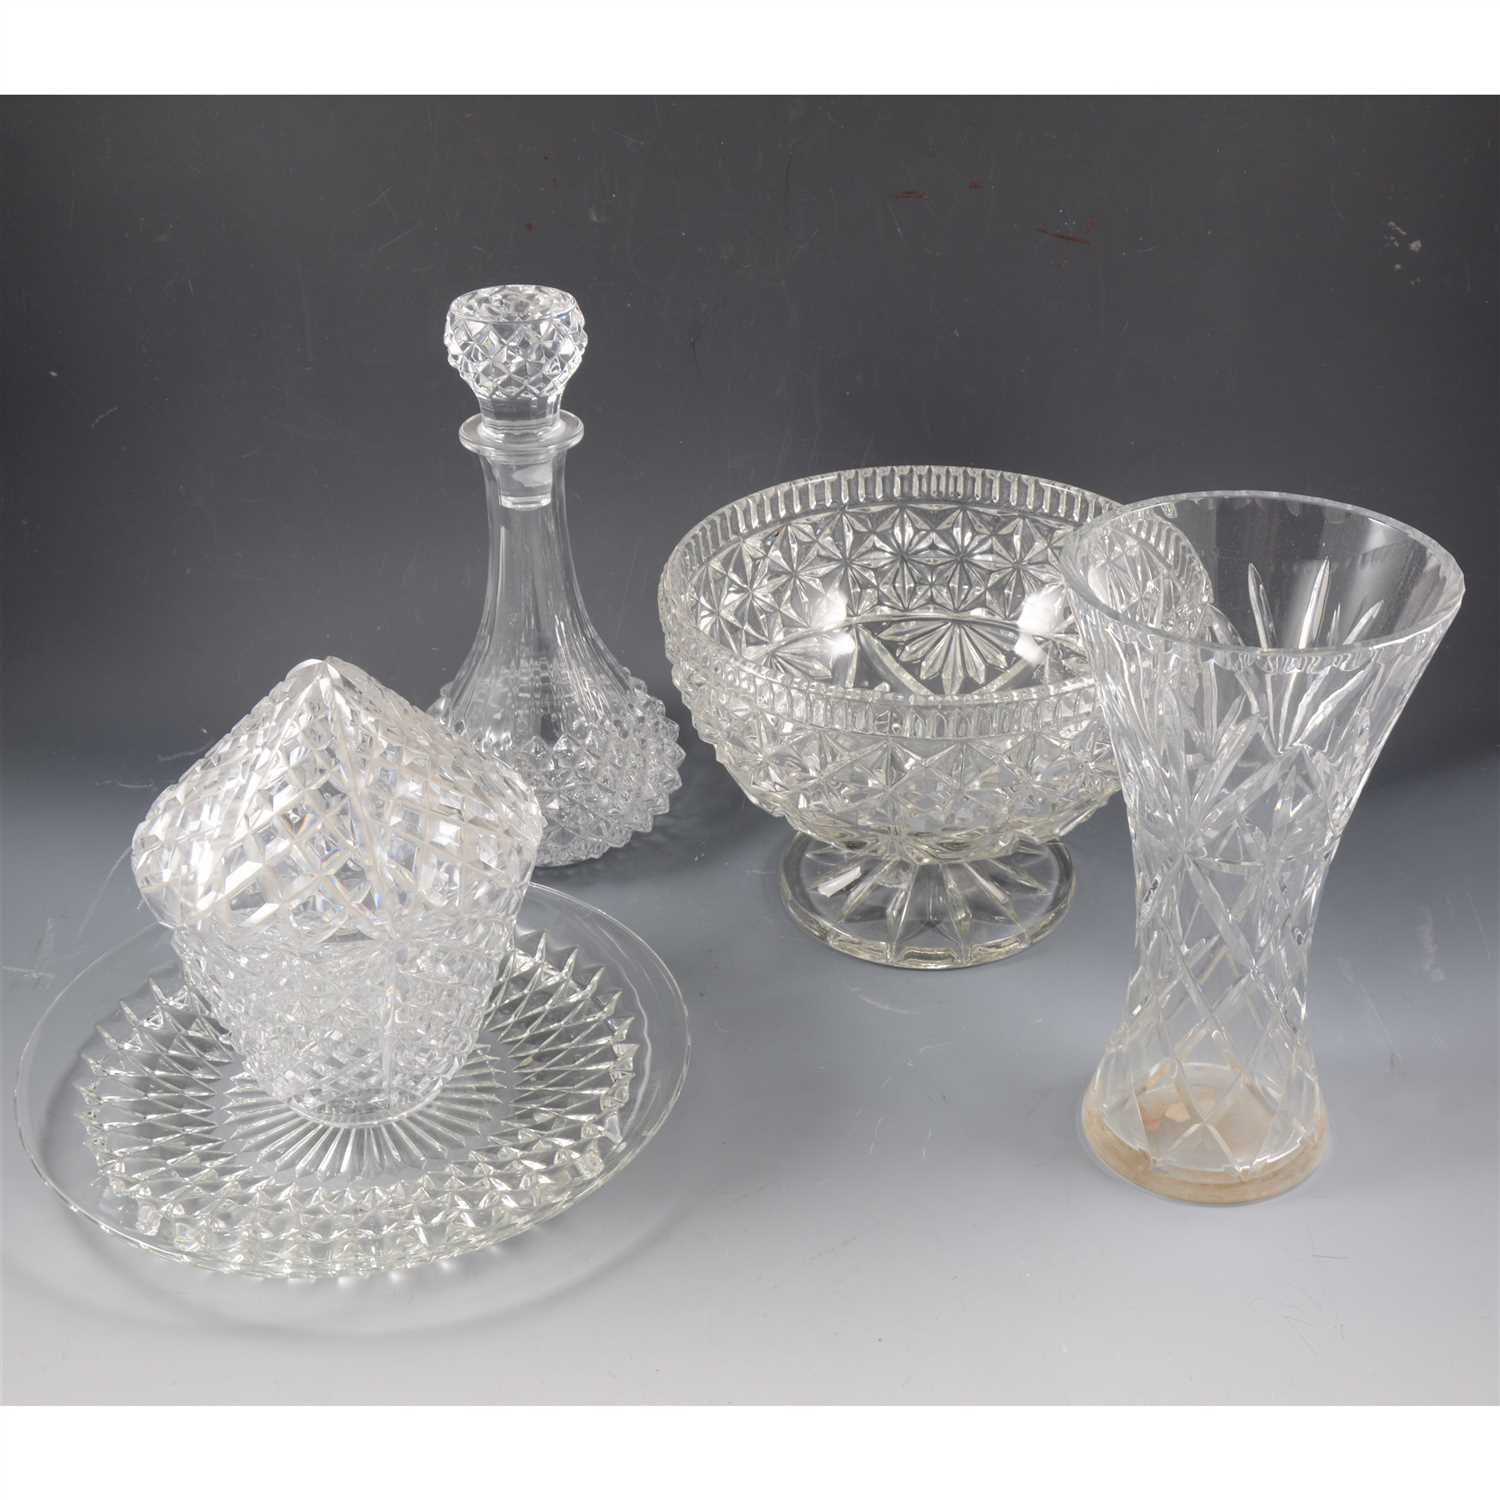 Lot 23 - Cut glass table lamp, an oil lamp and other glassware.